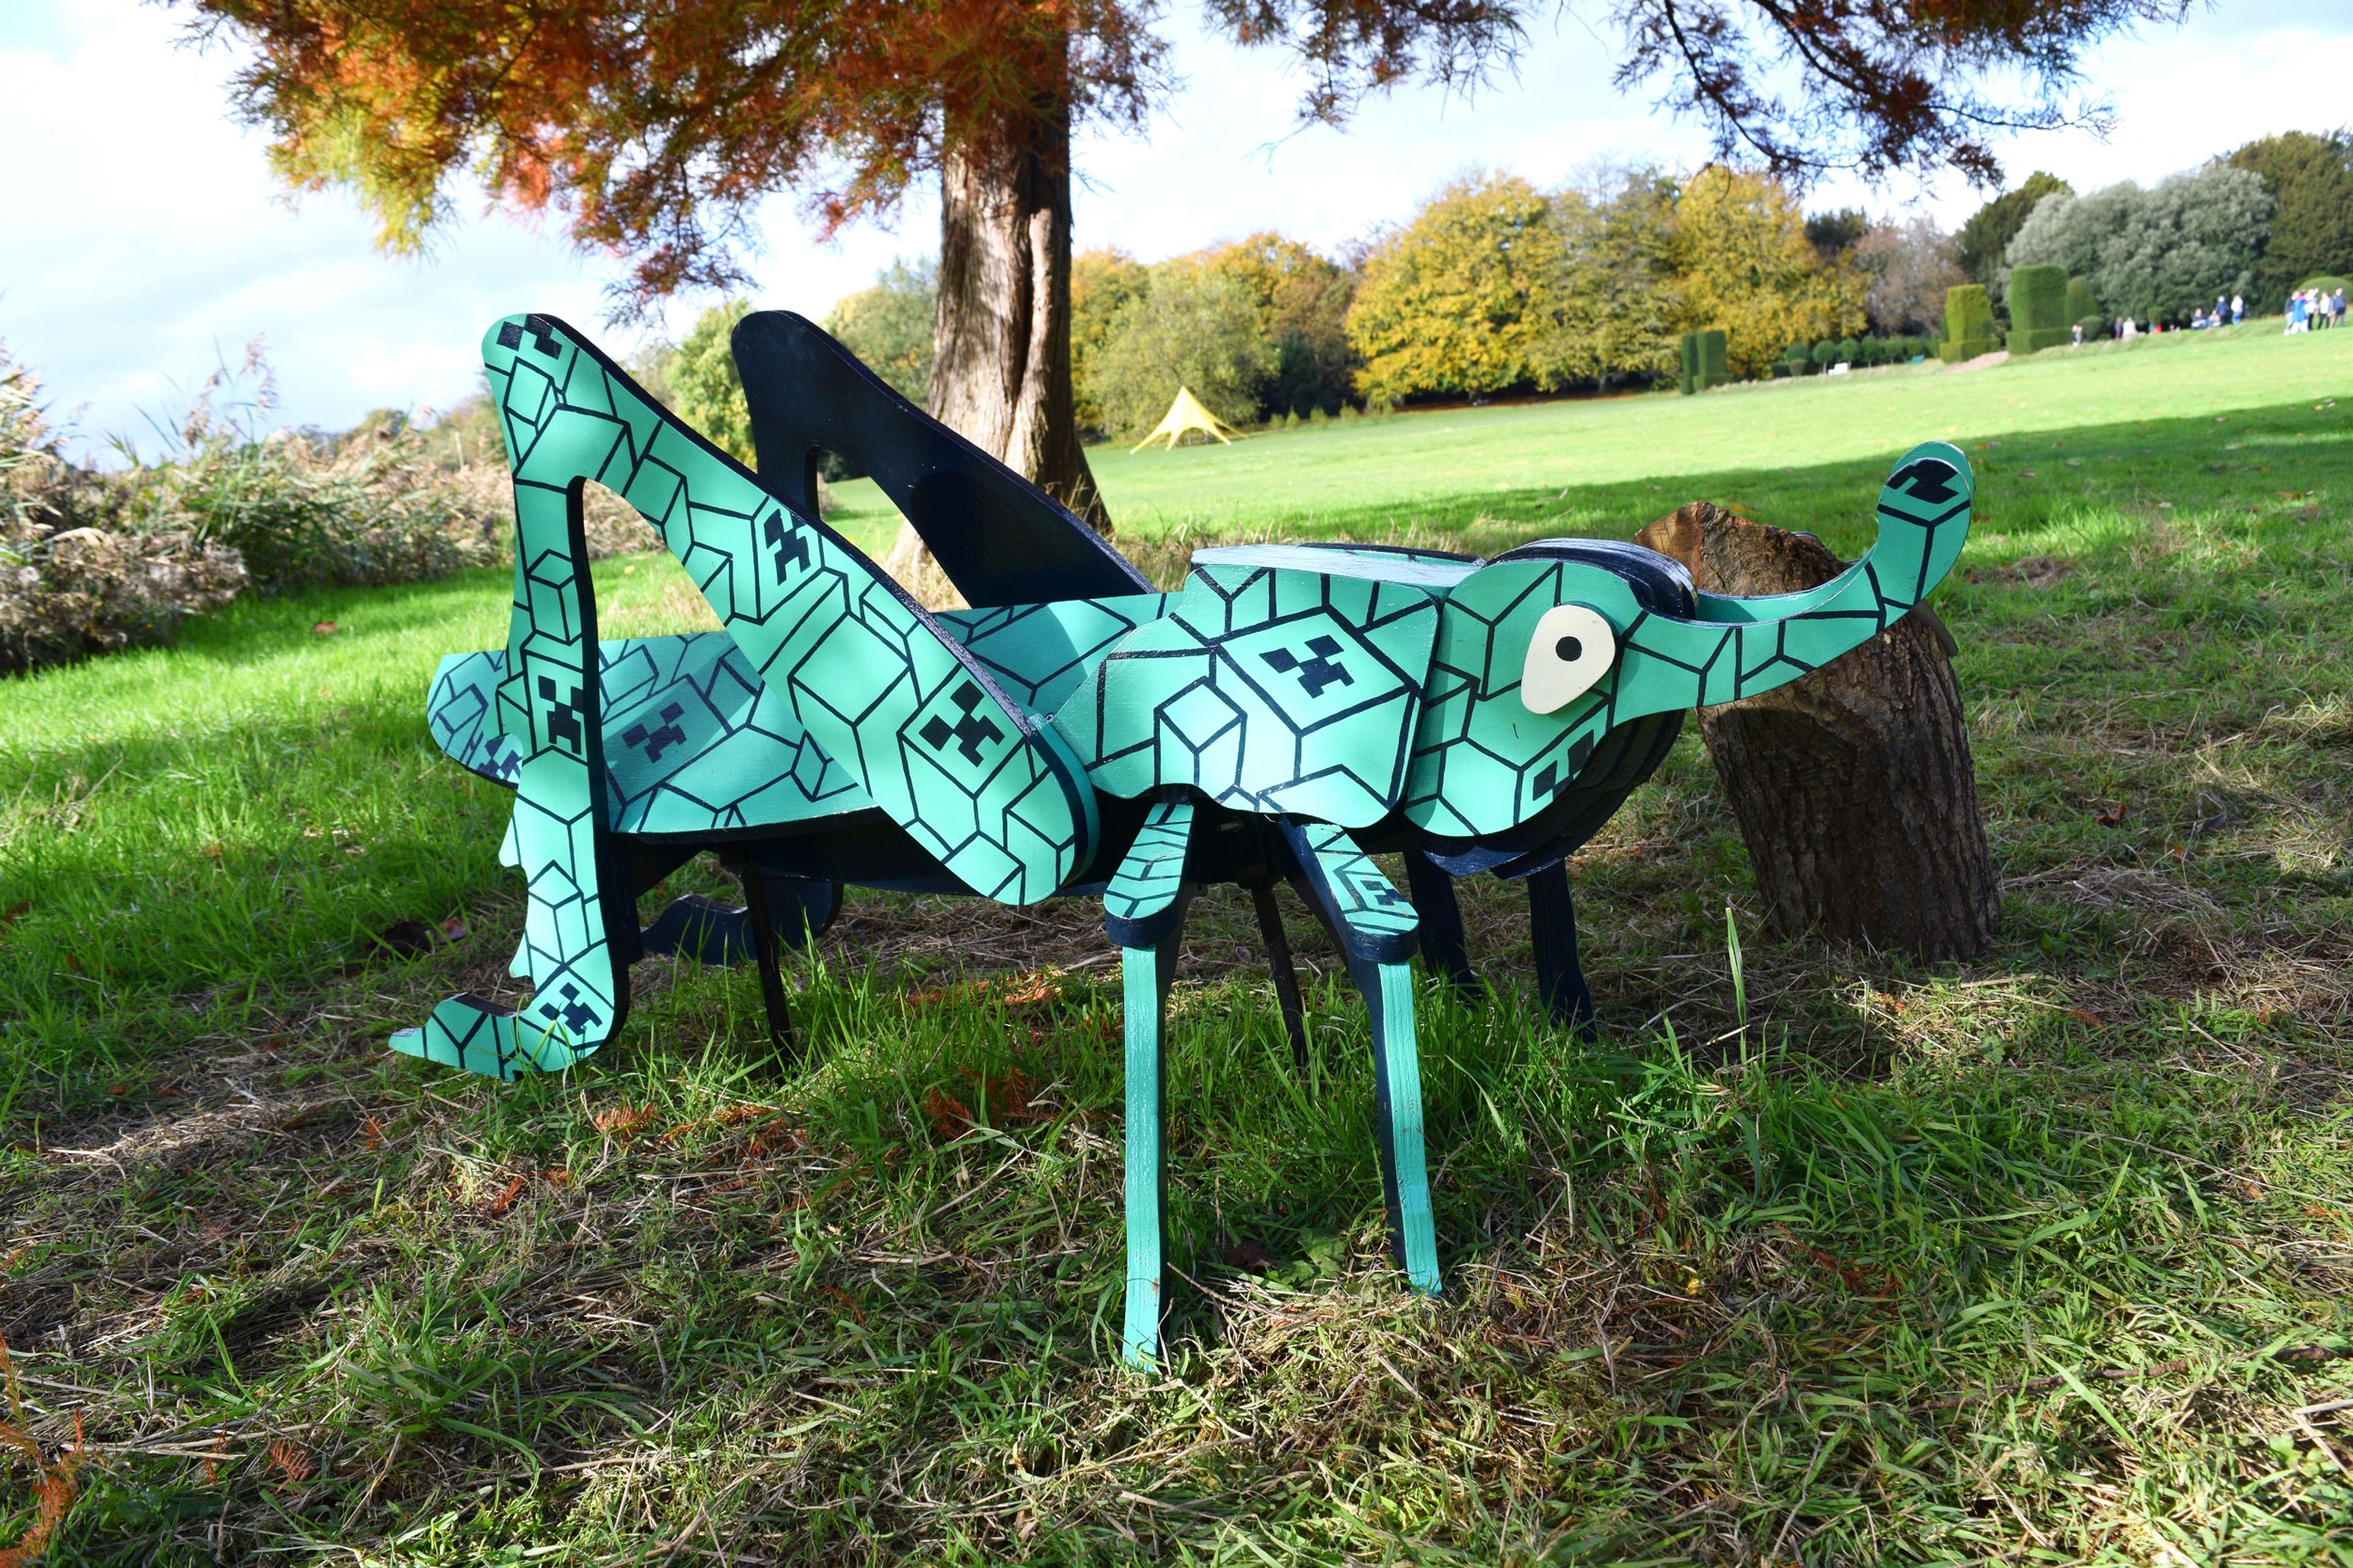 Photograph of a large grasshopper sculpture in a park, the grasshopper has been painted in green with a black pattern.